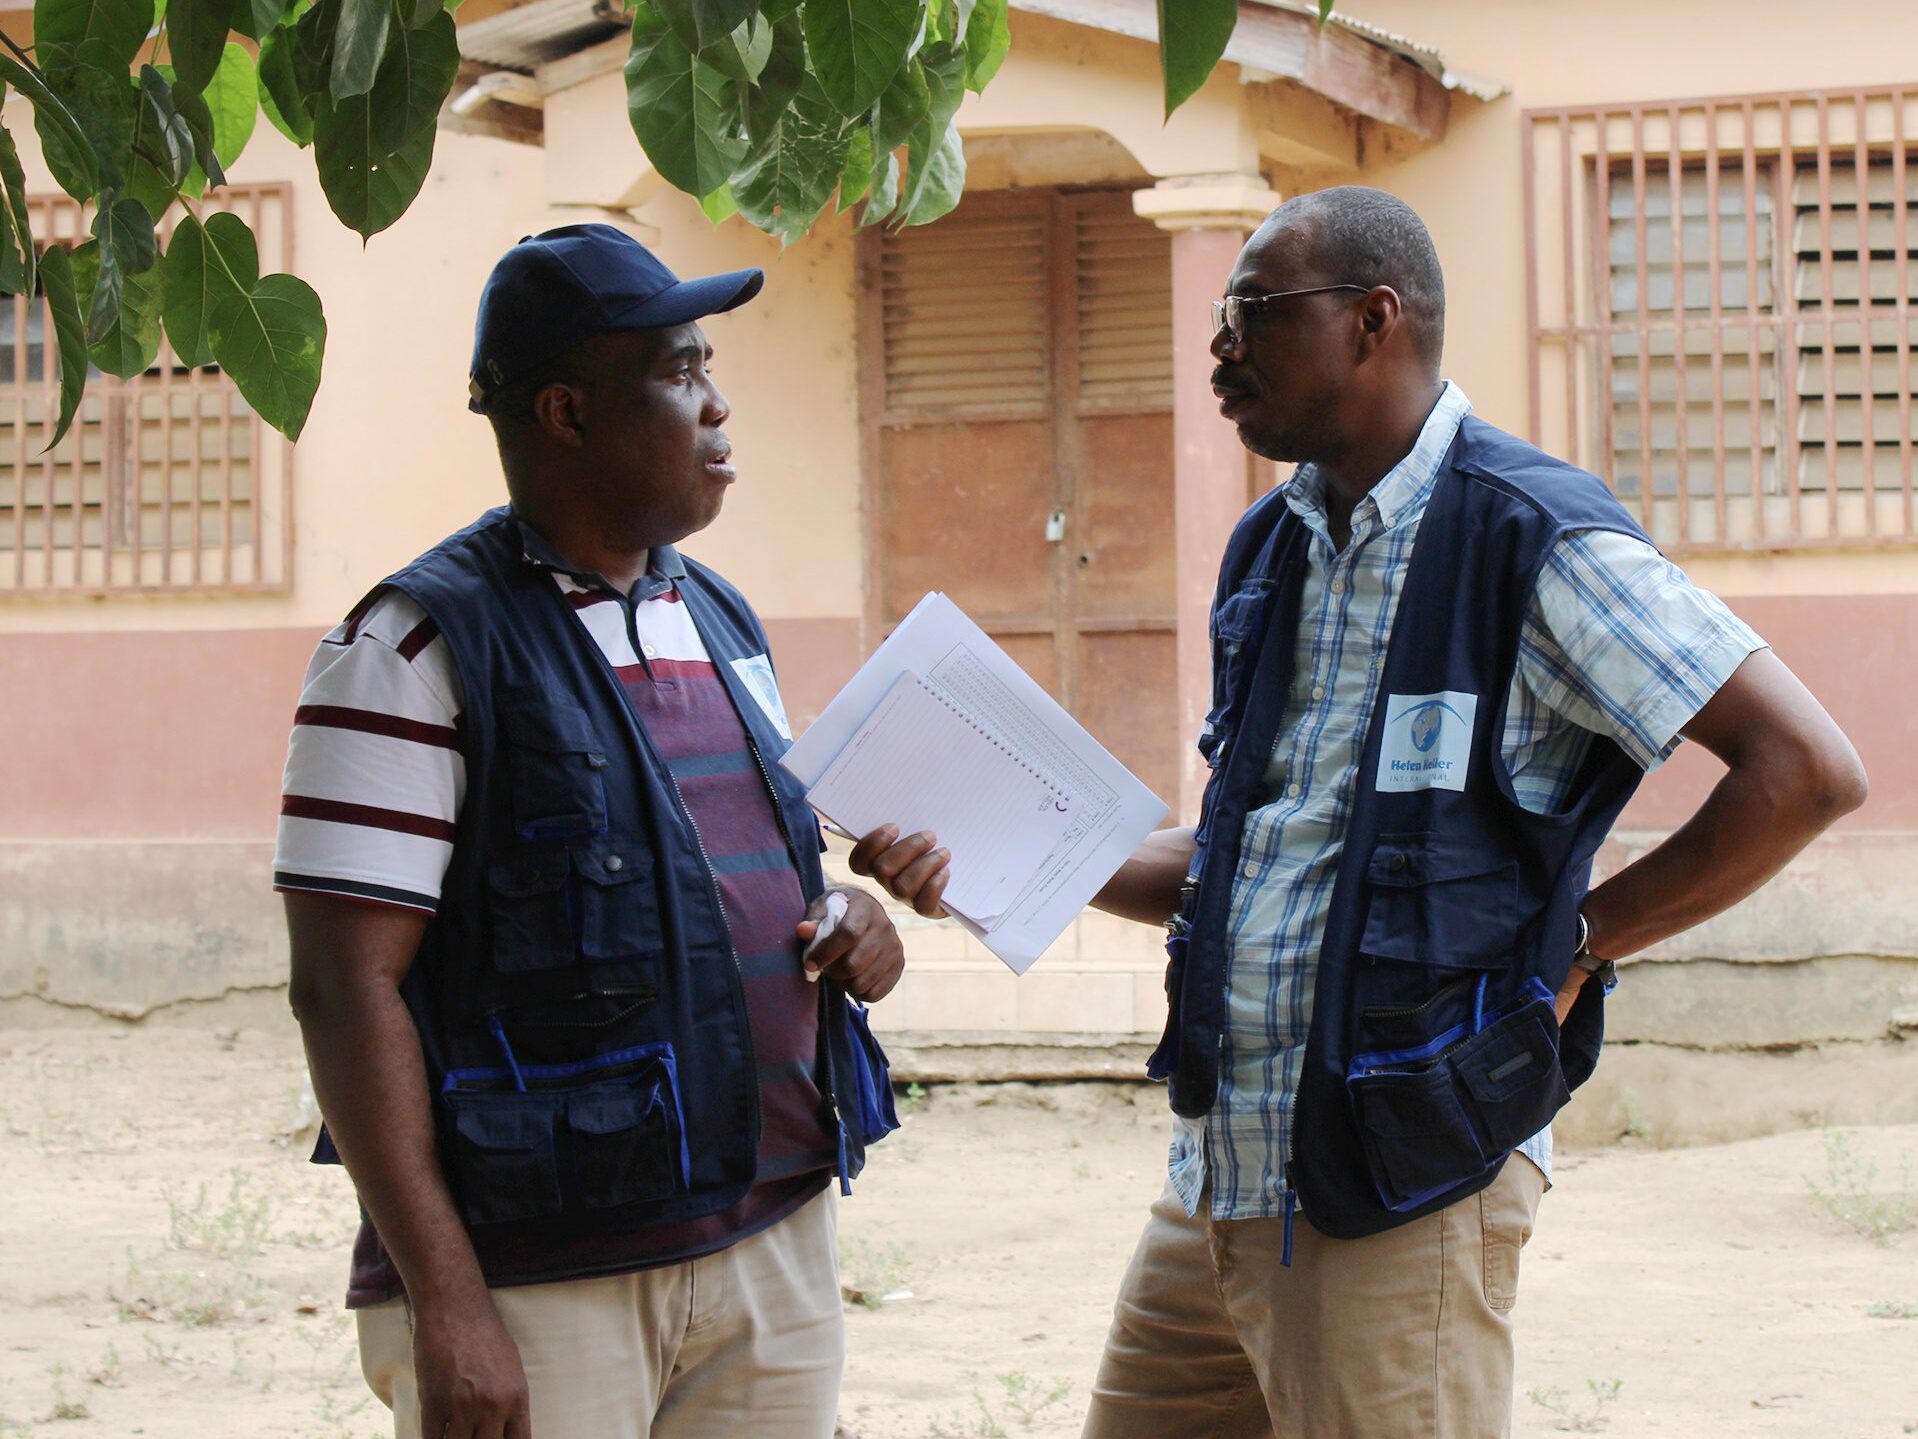 Two men with dark skin stand next to each other speaking outside. The man on the right is holding a notebook and papers and gesturing as he speaks.